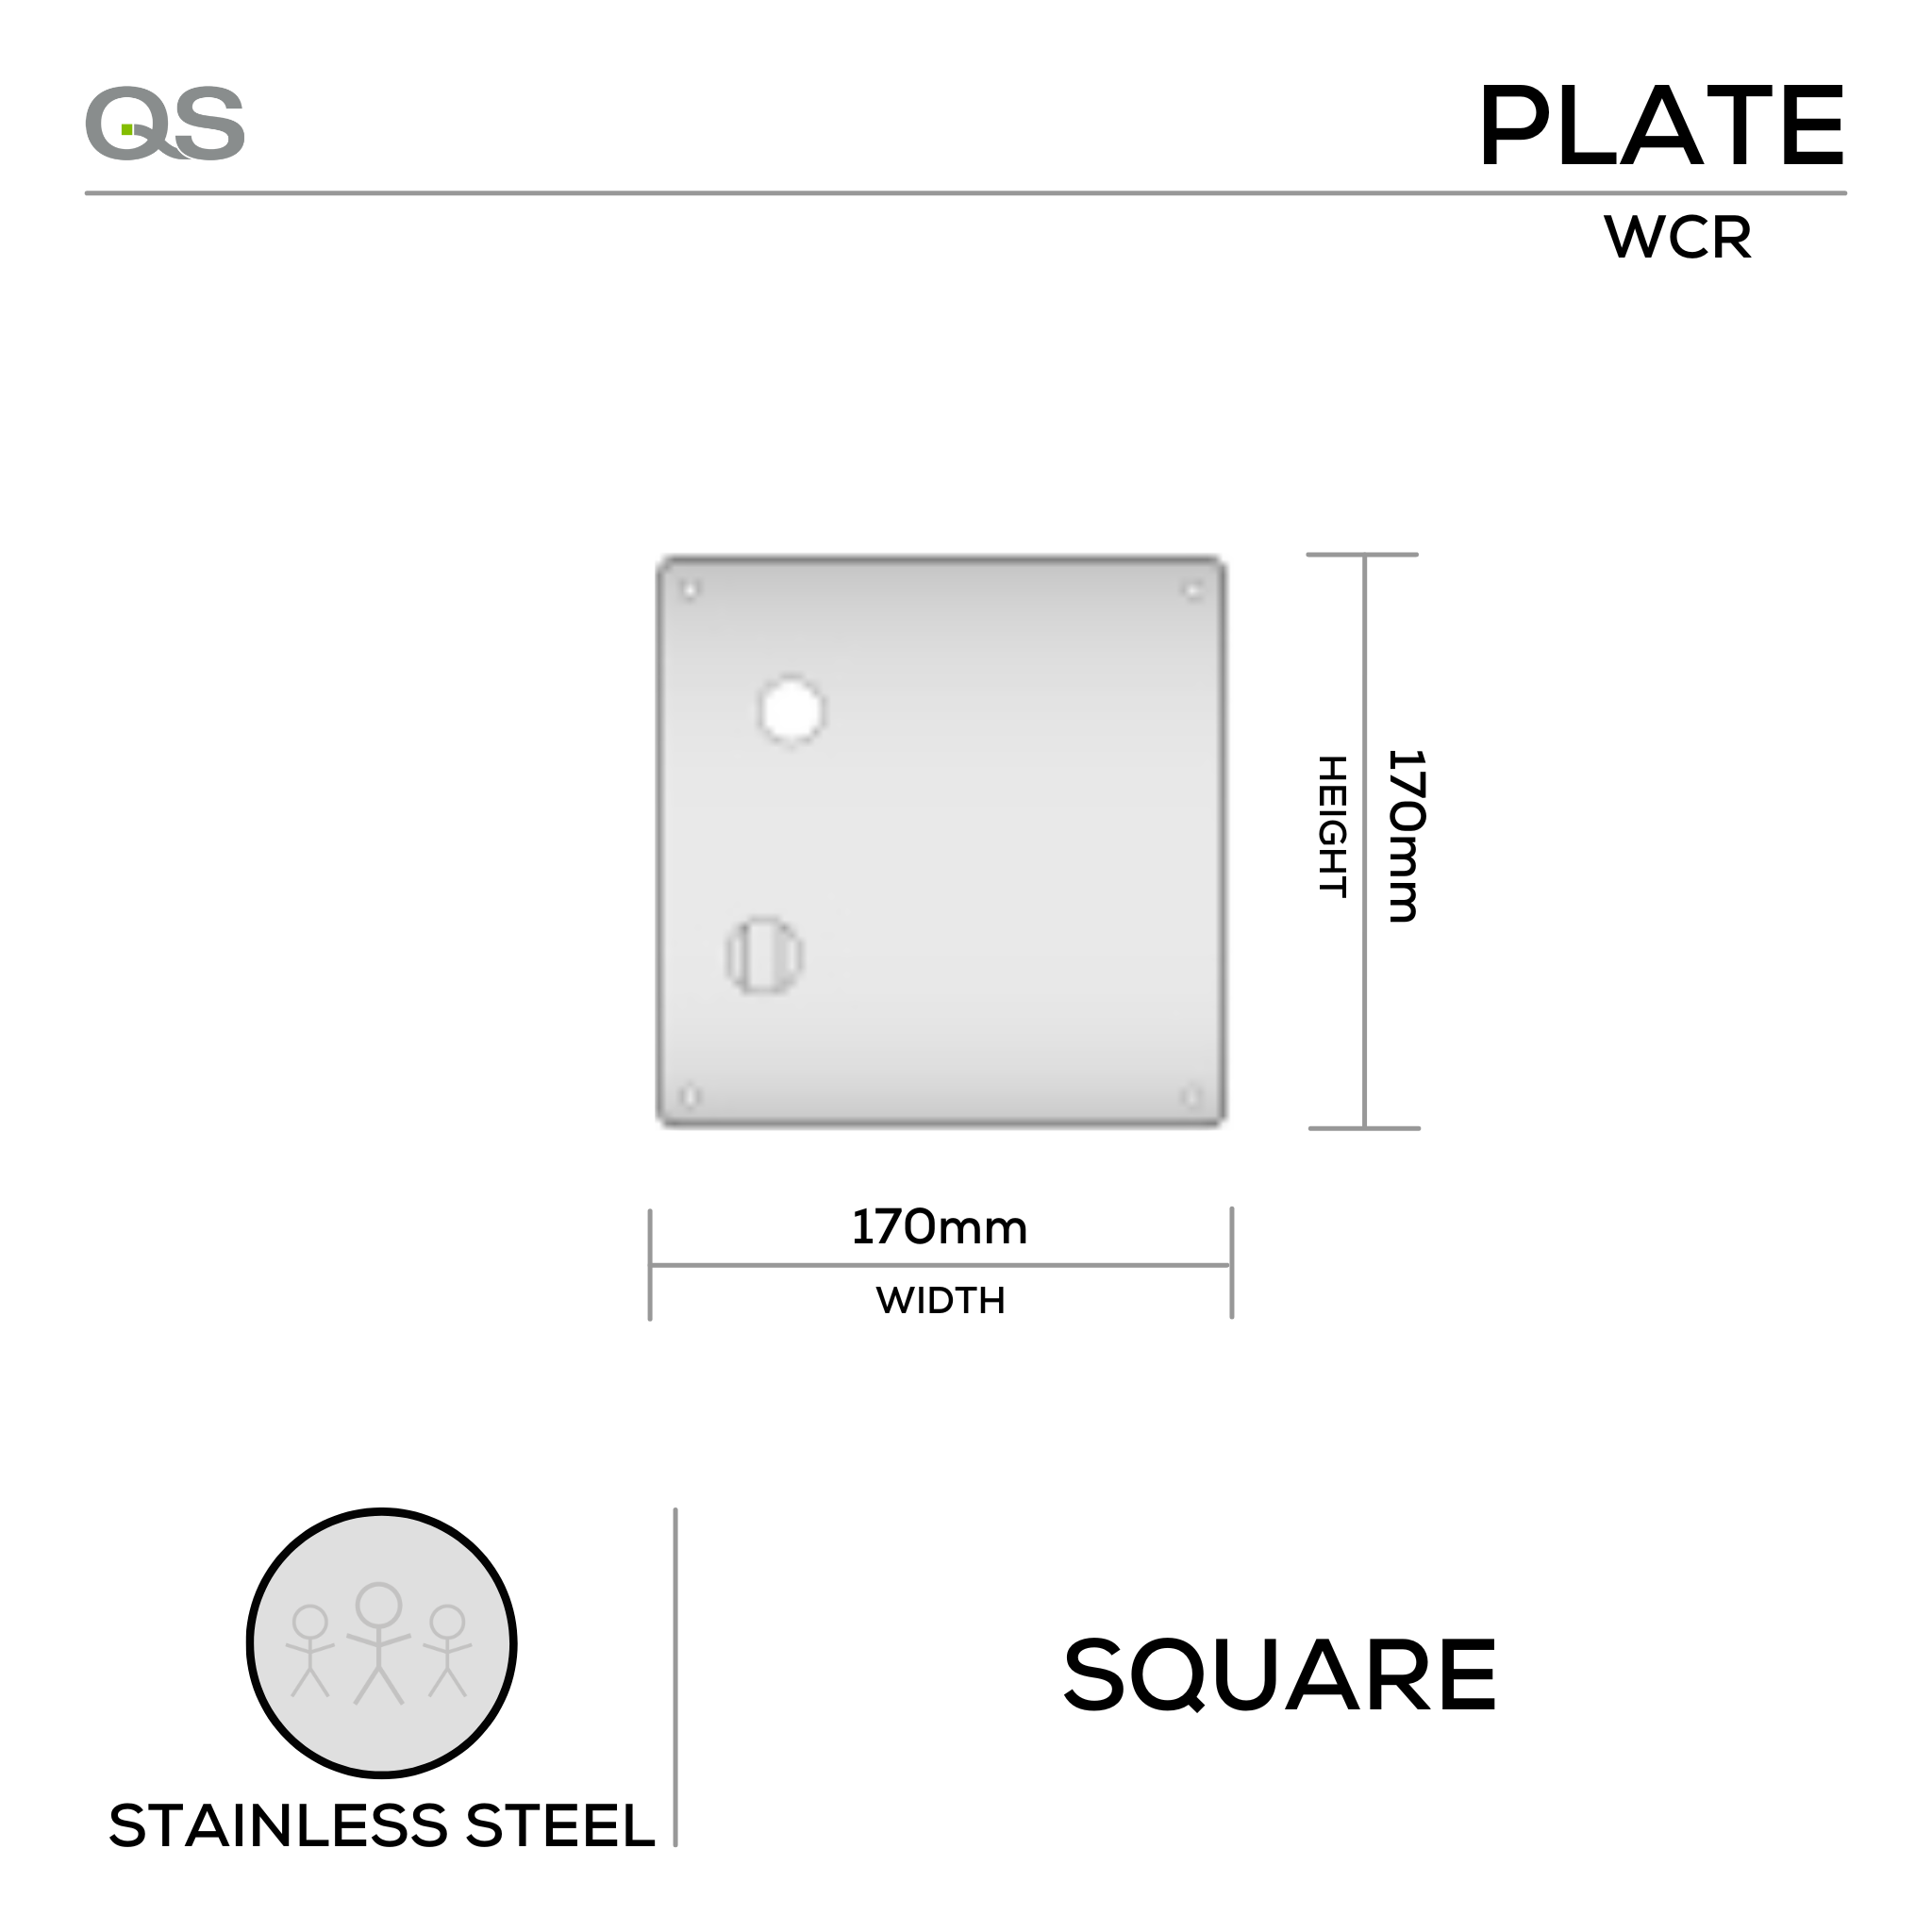 QS4485 WC/R, Plate, Square, 170mm (l) x 170mm (w), (Price if purchasing a Qs handle at same time), Stainless Steel, QS